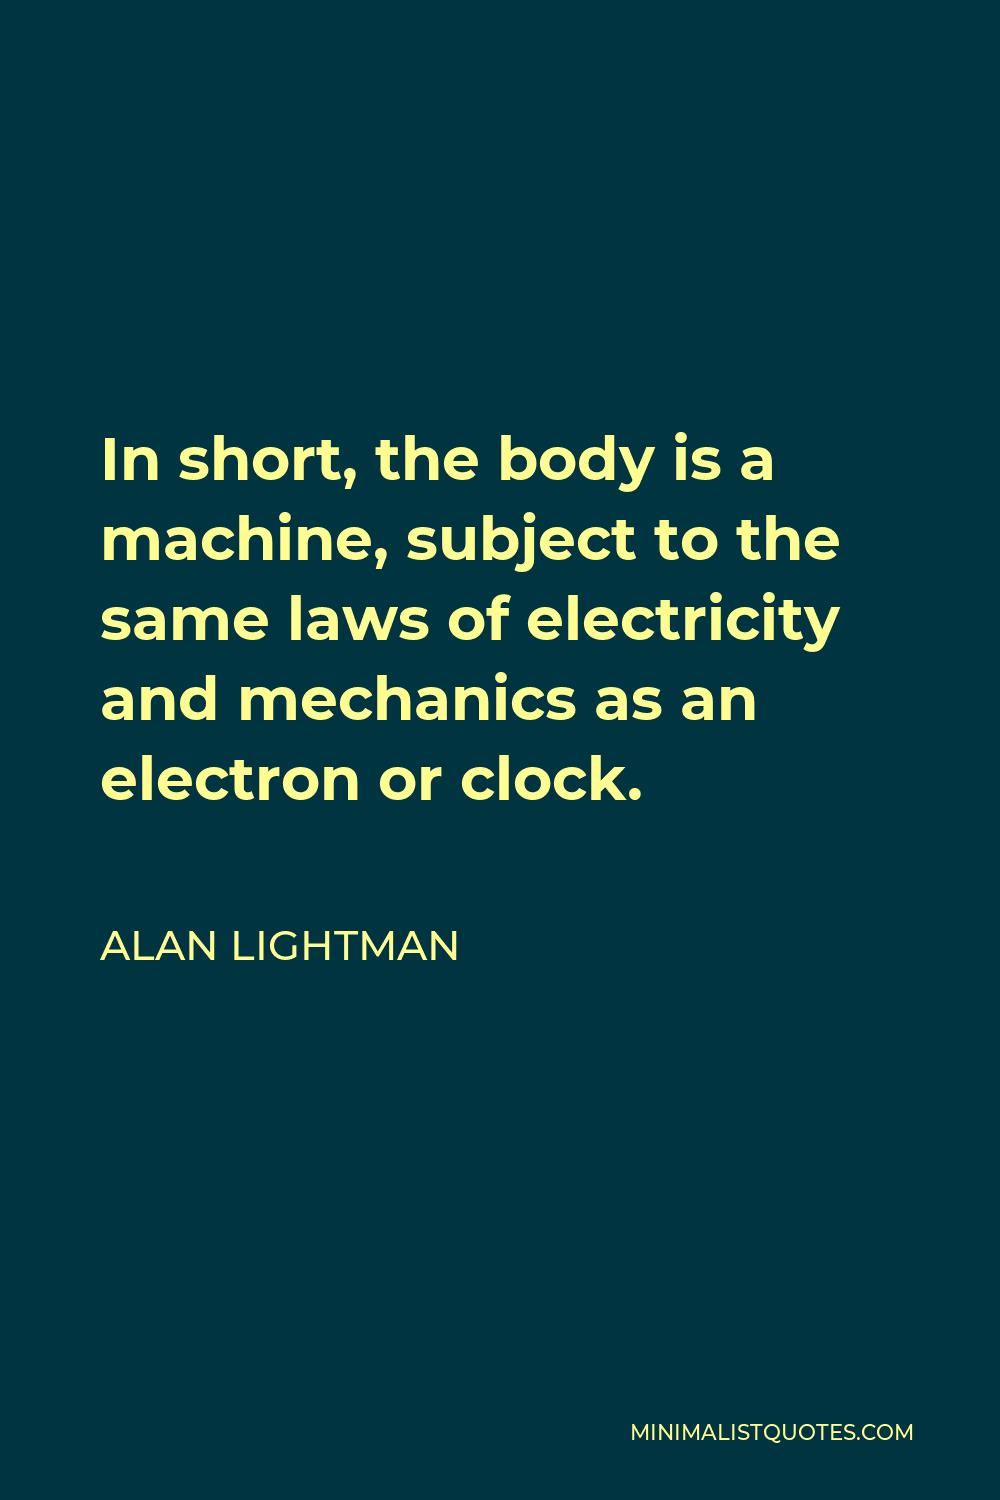 Alan Lightman Quote - In short, the body is a machine, subject to the same laws of electricity and mechanics as an electron or clock.